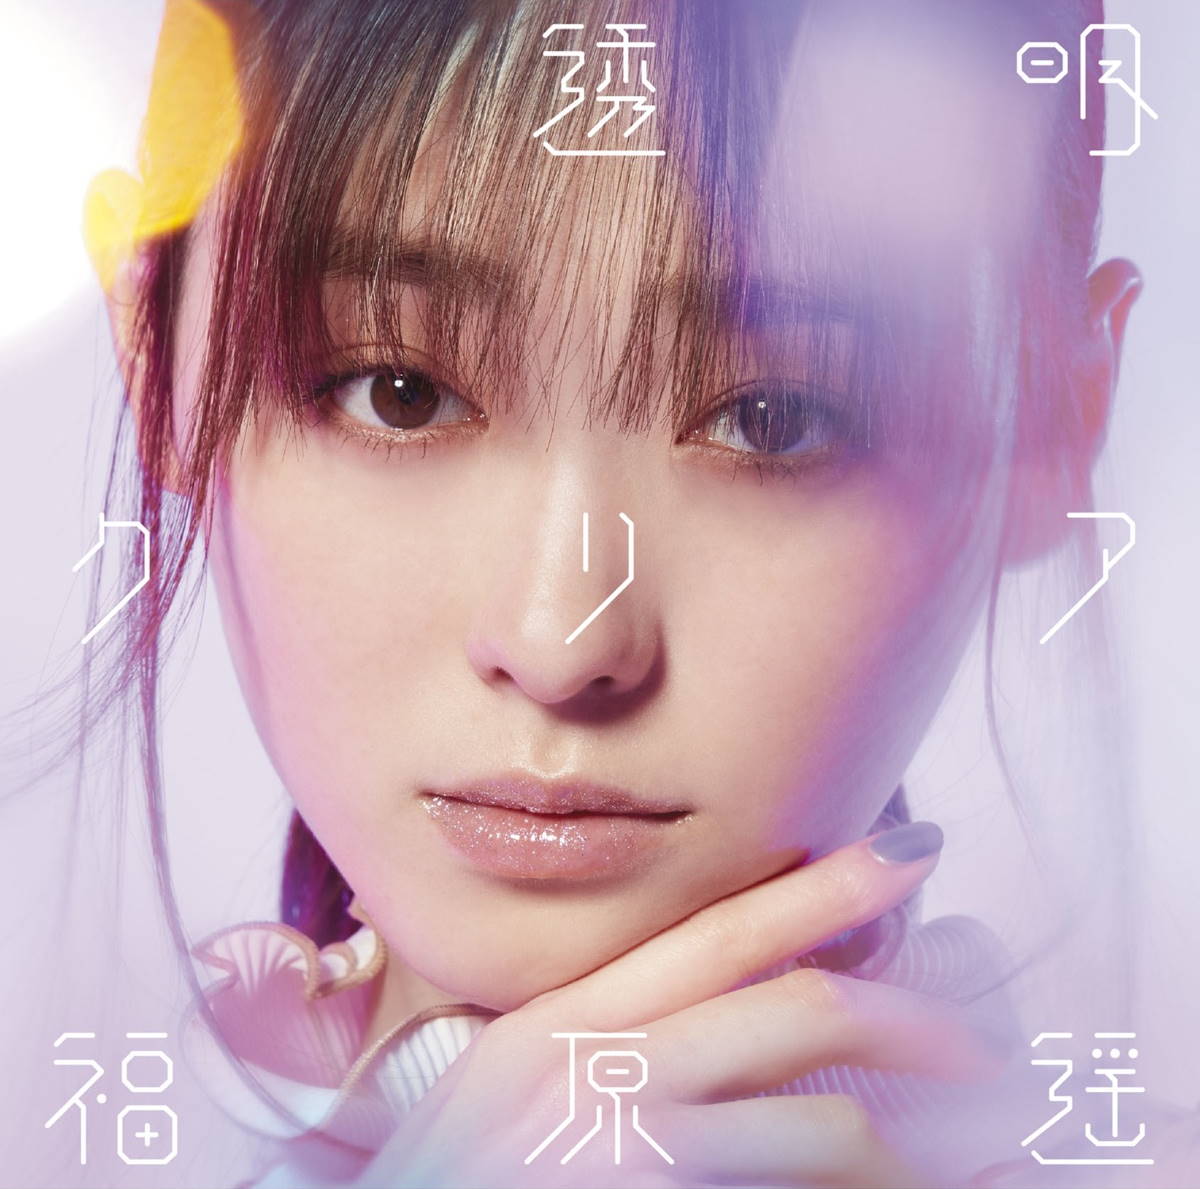 Cover art for『Haruka Fukuhara - Monochrome』from the release『Toumei Clear』